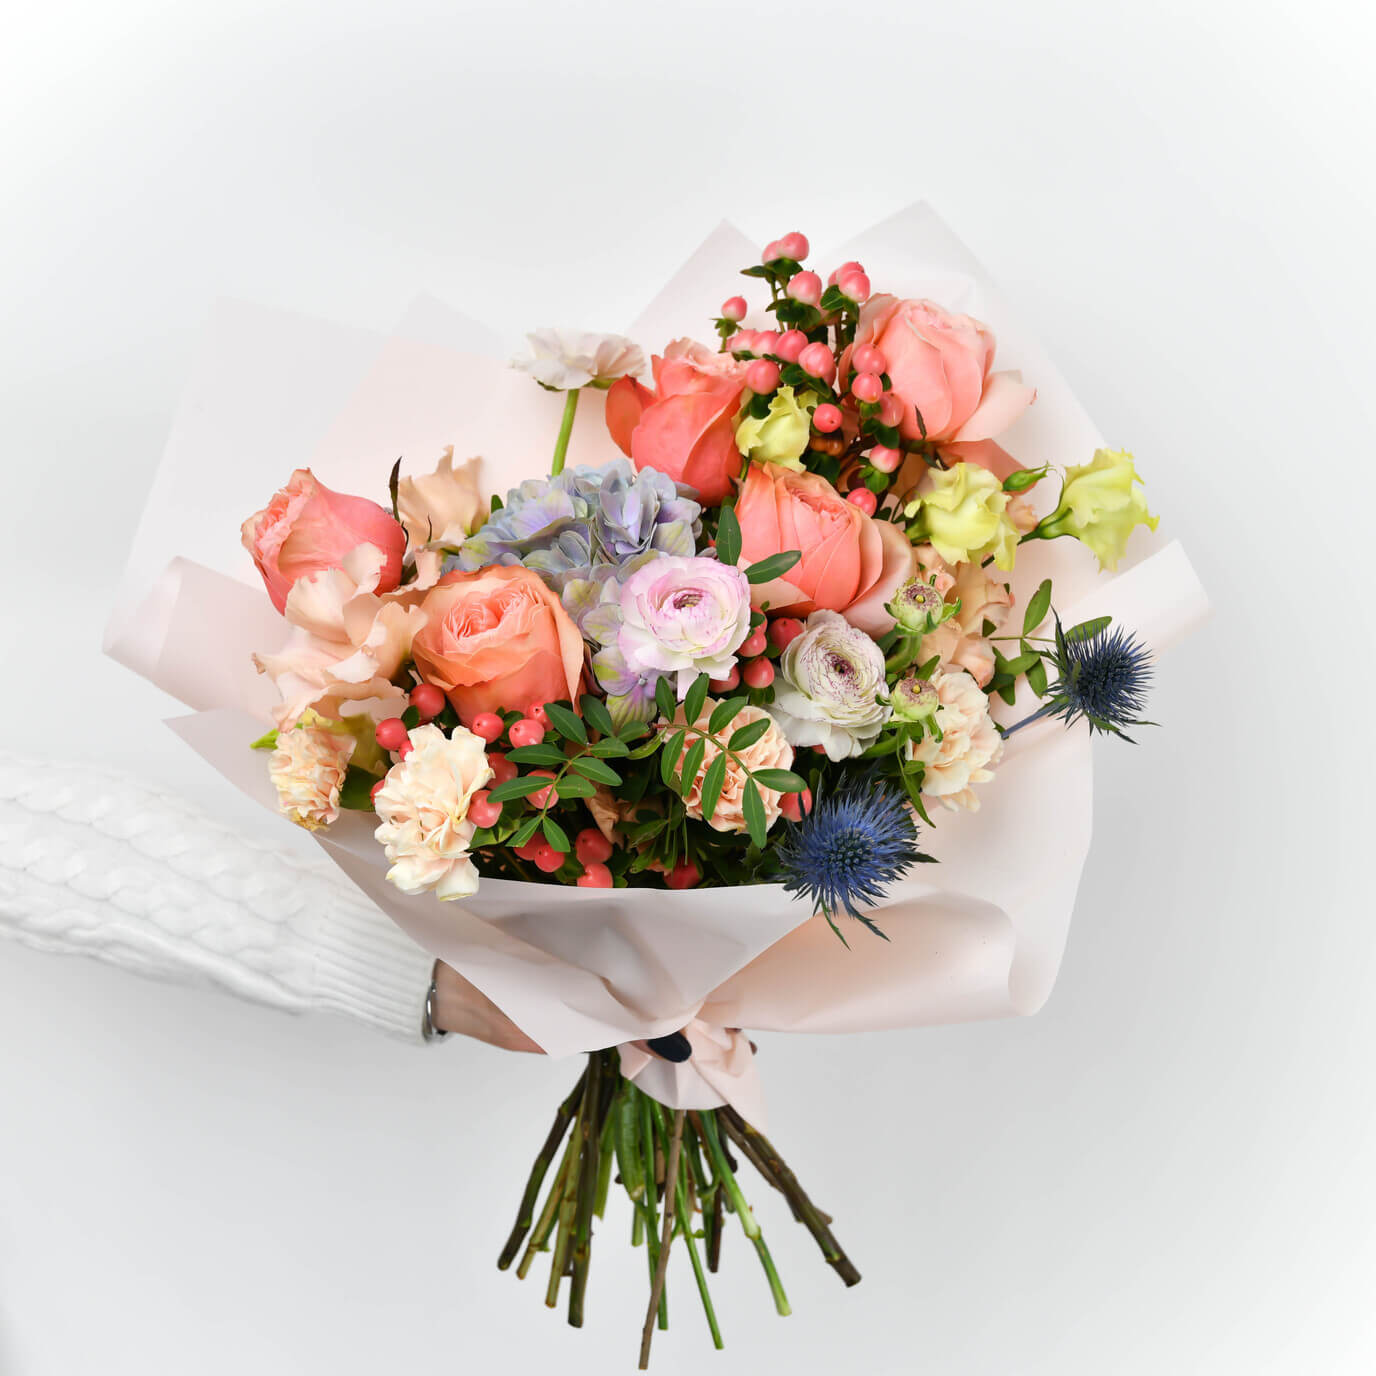 Bouquet with roses, lisianthus and hydrangea